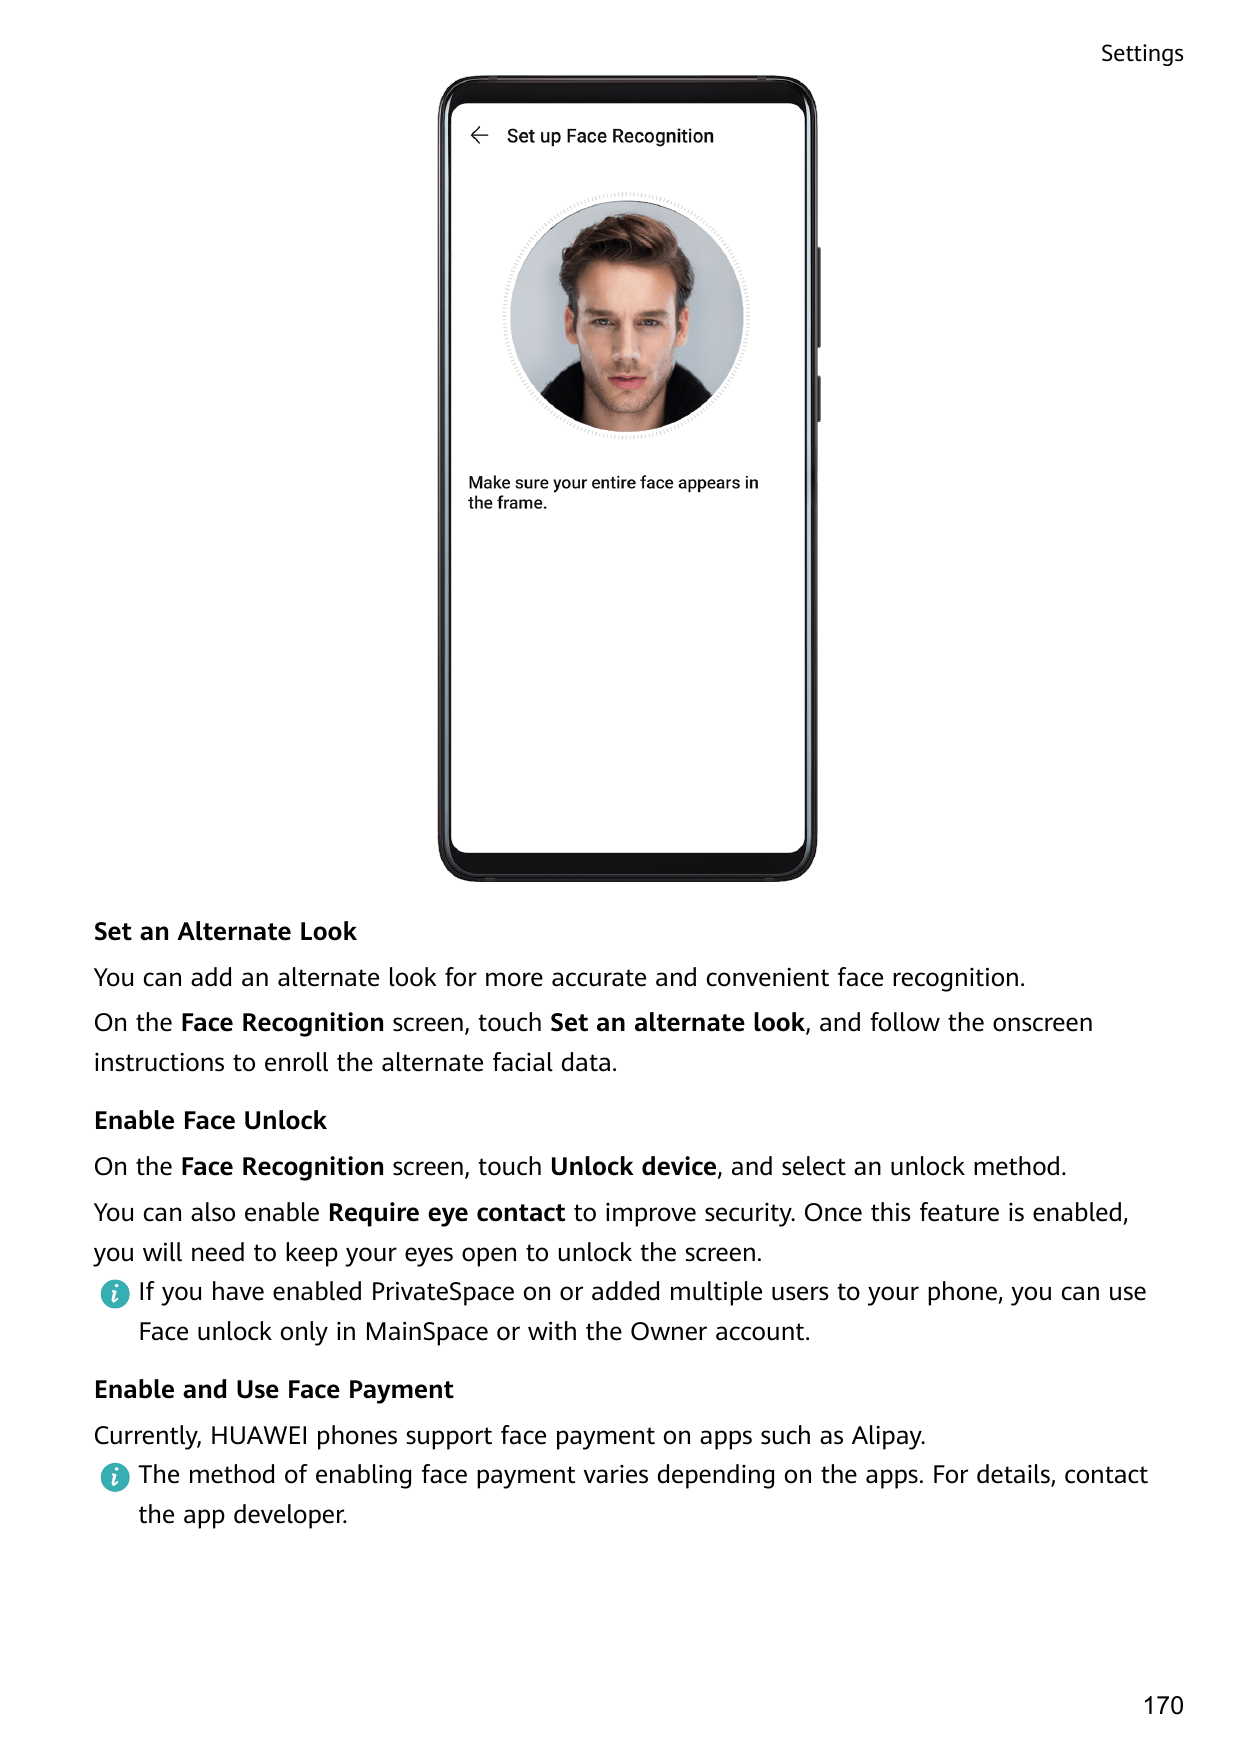 SettingsSet an Alternate LookYou can add an alternate look for more accurate and convenient face recognition.On the Face Recogni